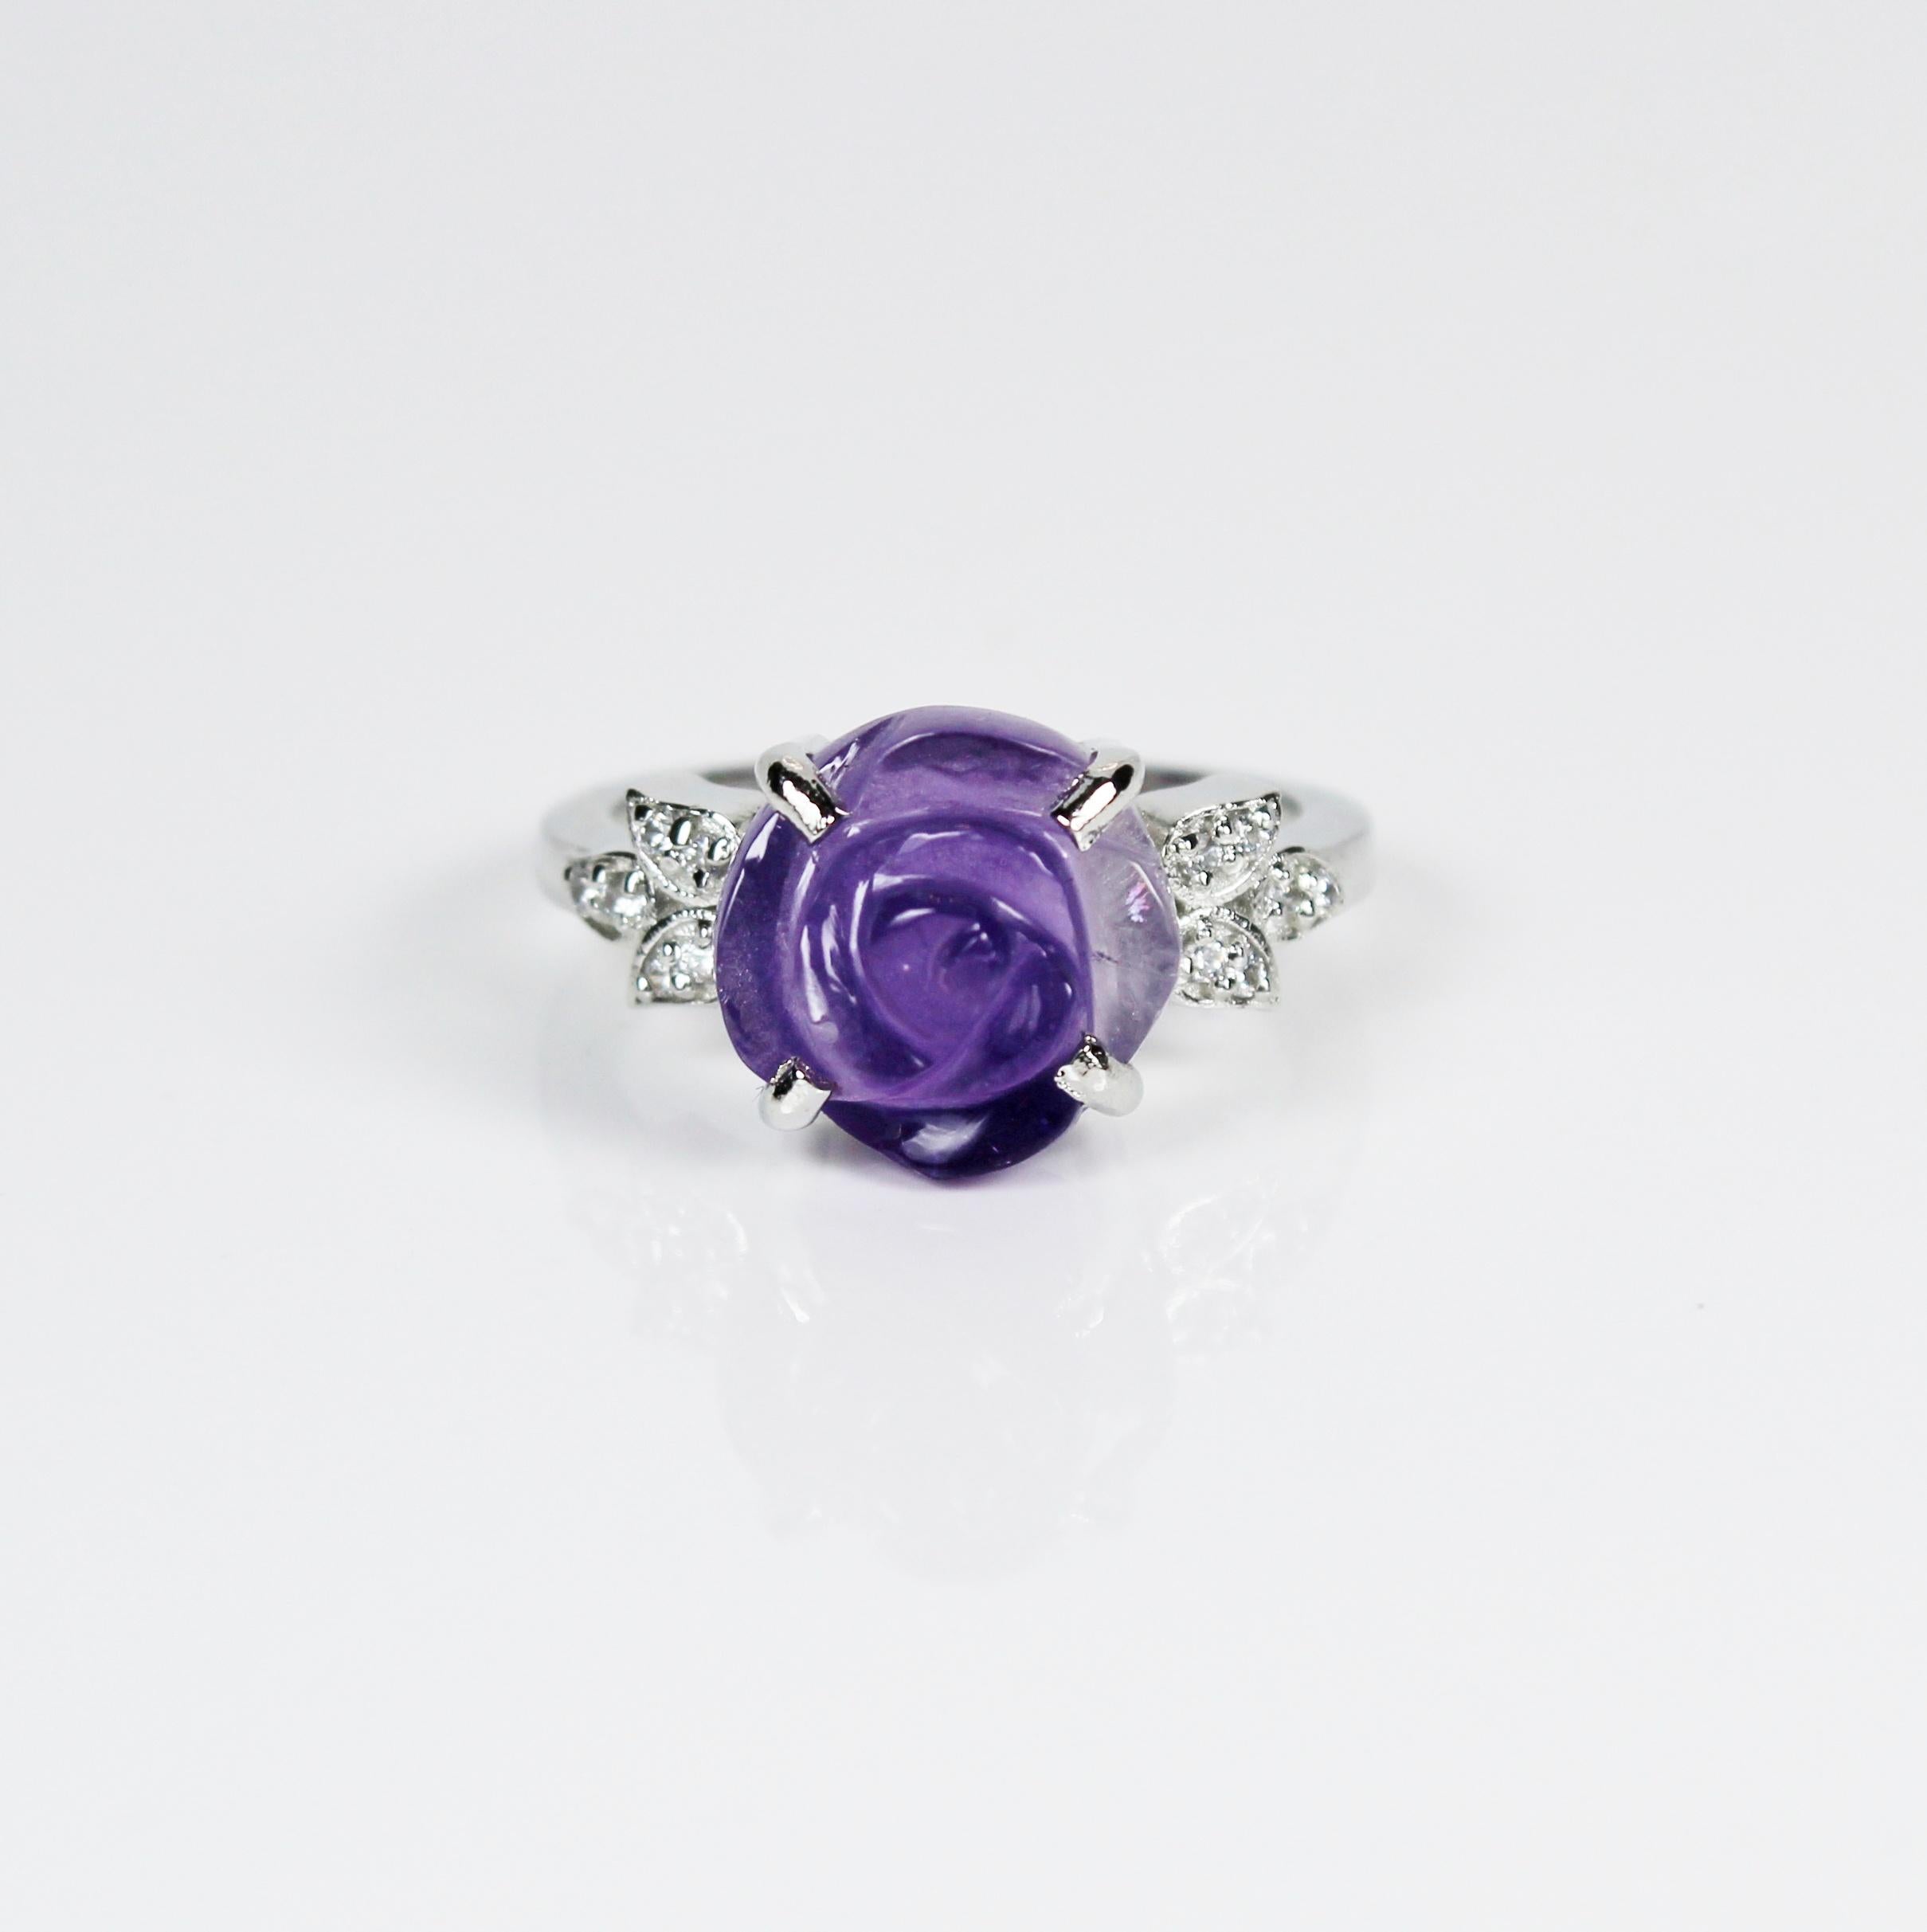 Women's Natural Rose Cut Amethyst Gemstone Ring For Sale